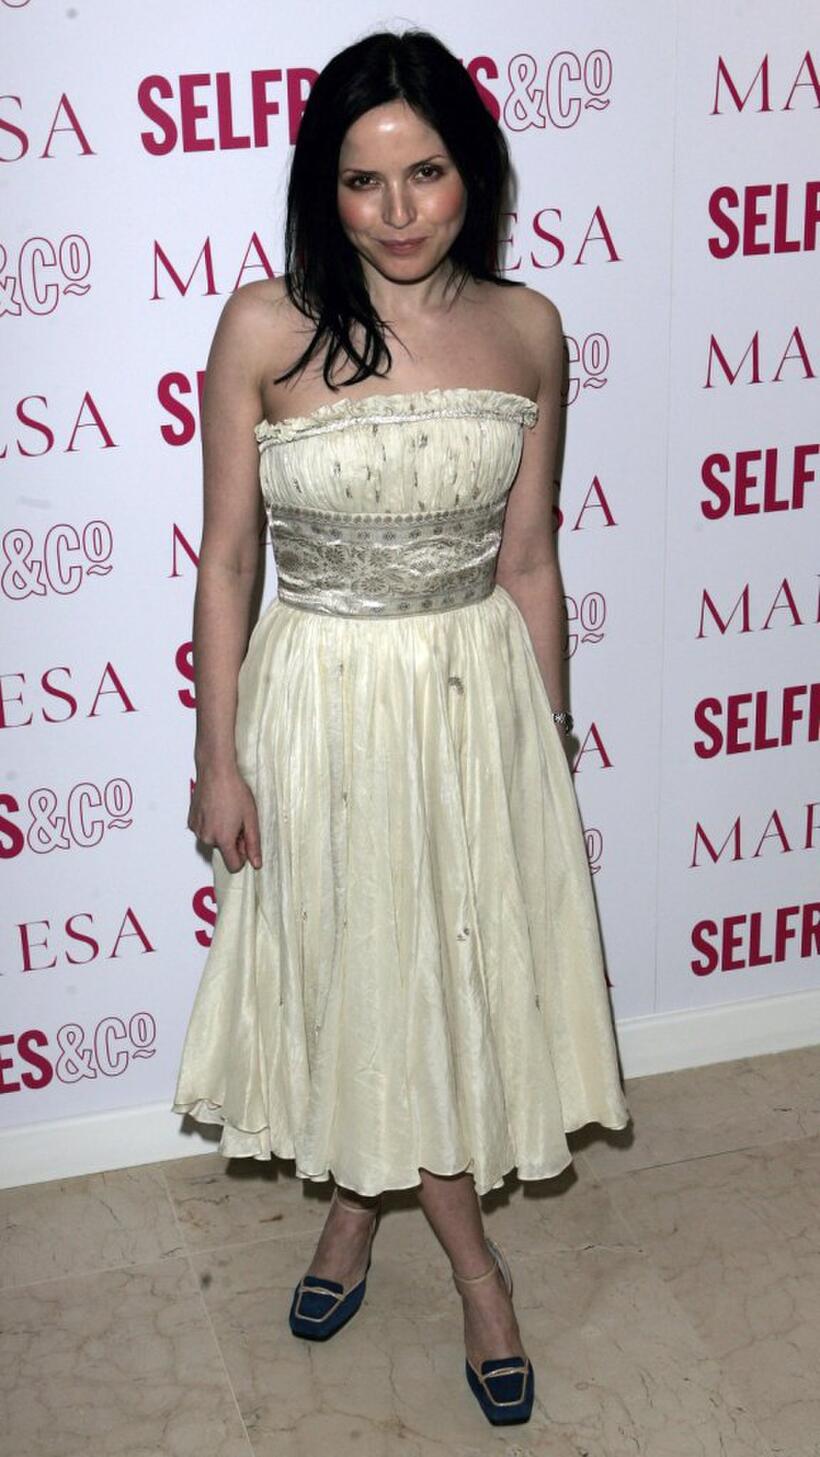 Andrea Corr at the VIP launch party for British couture label Marchesa's Spring/Summer 2006 collection.